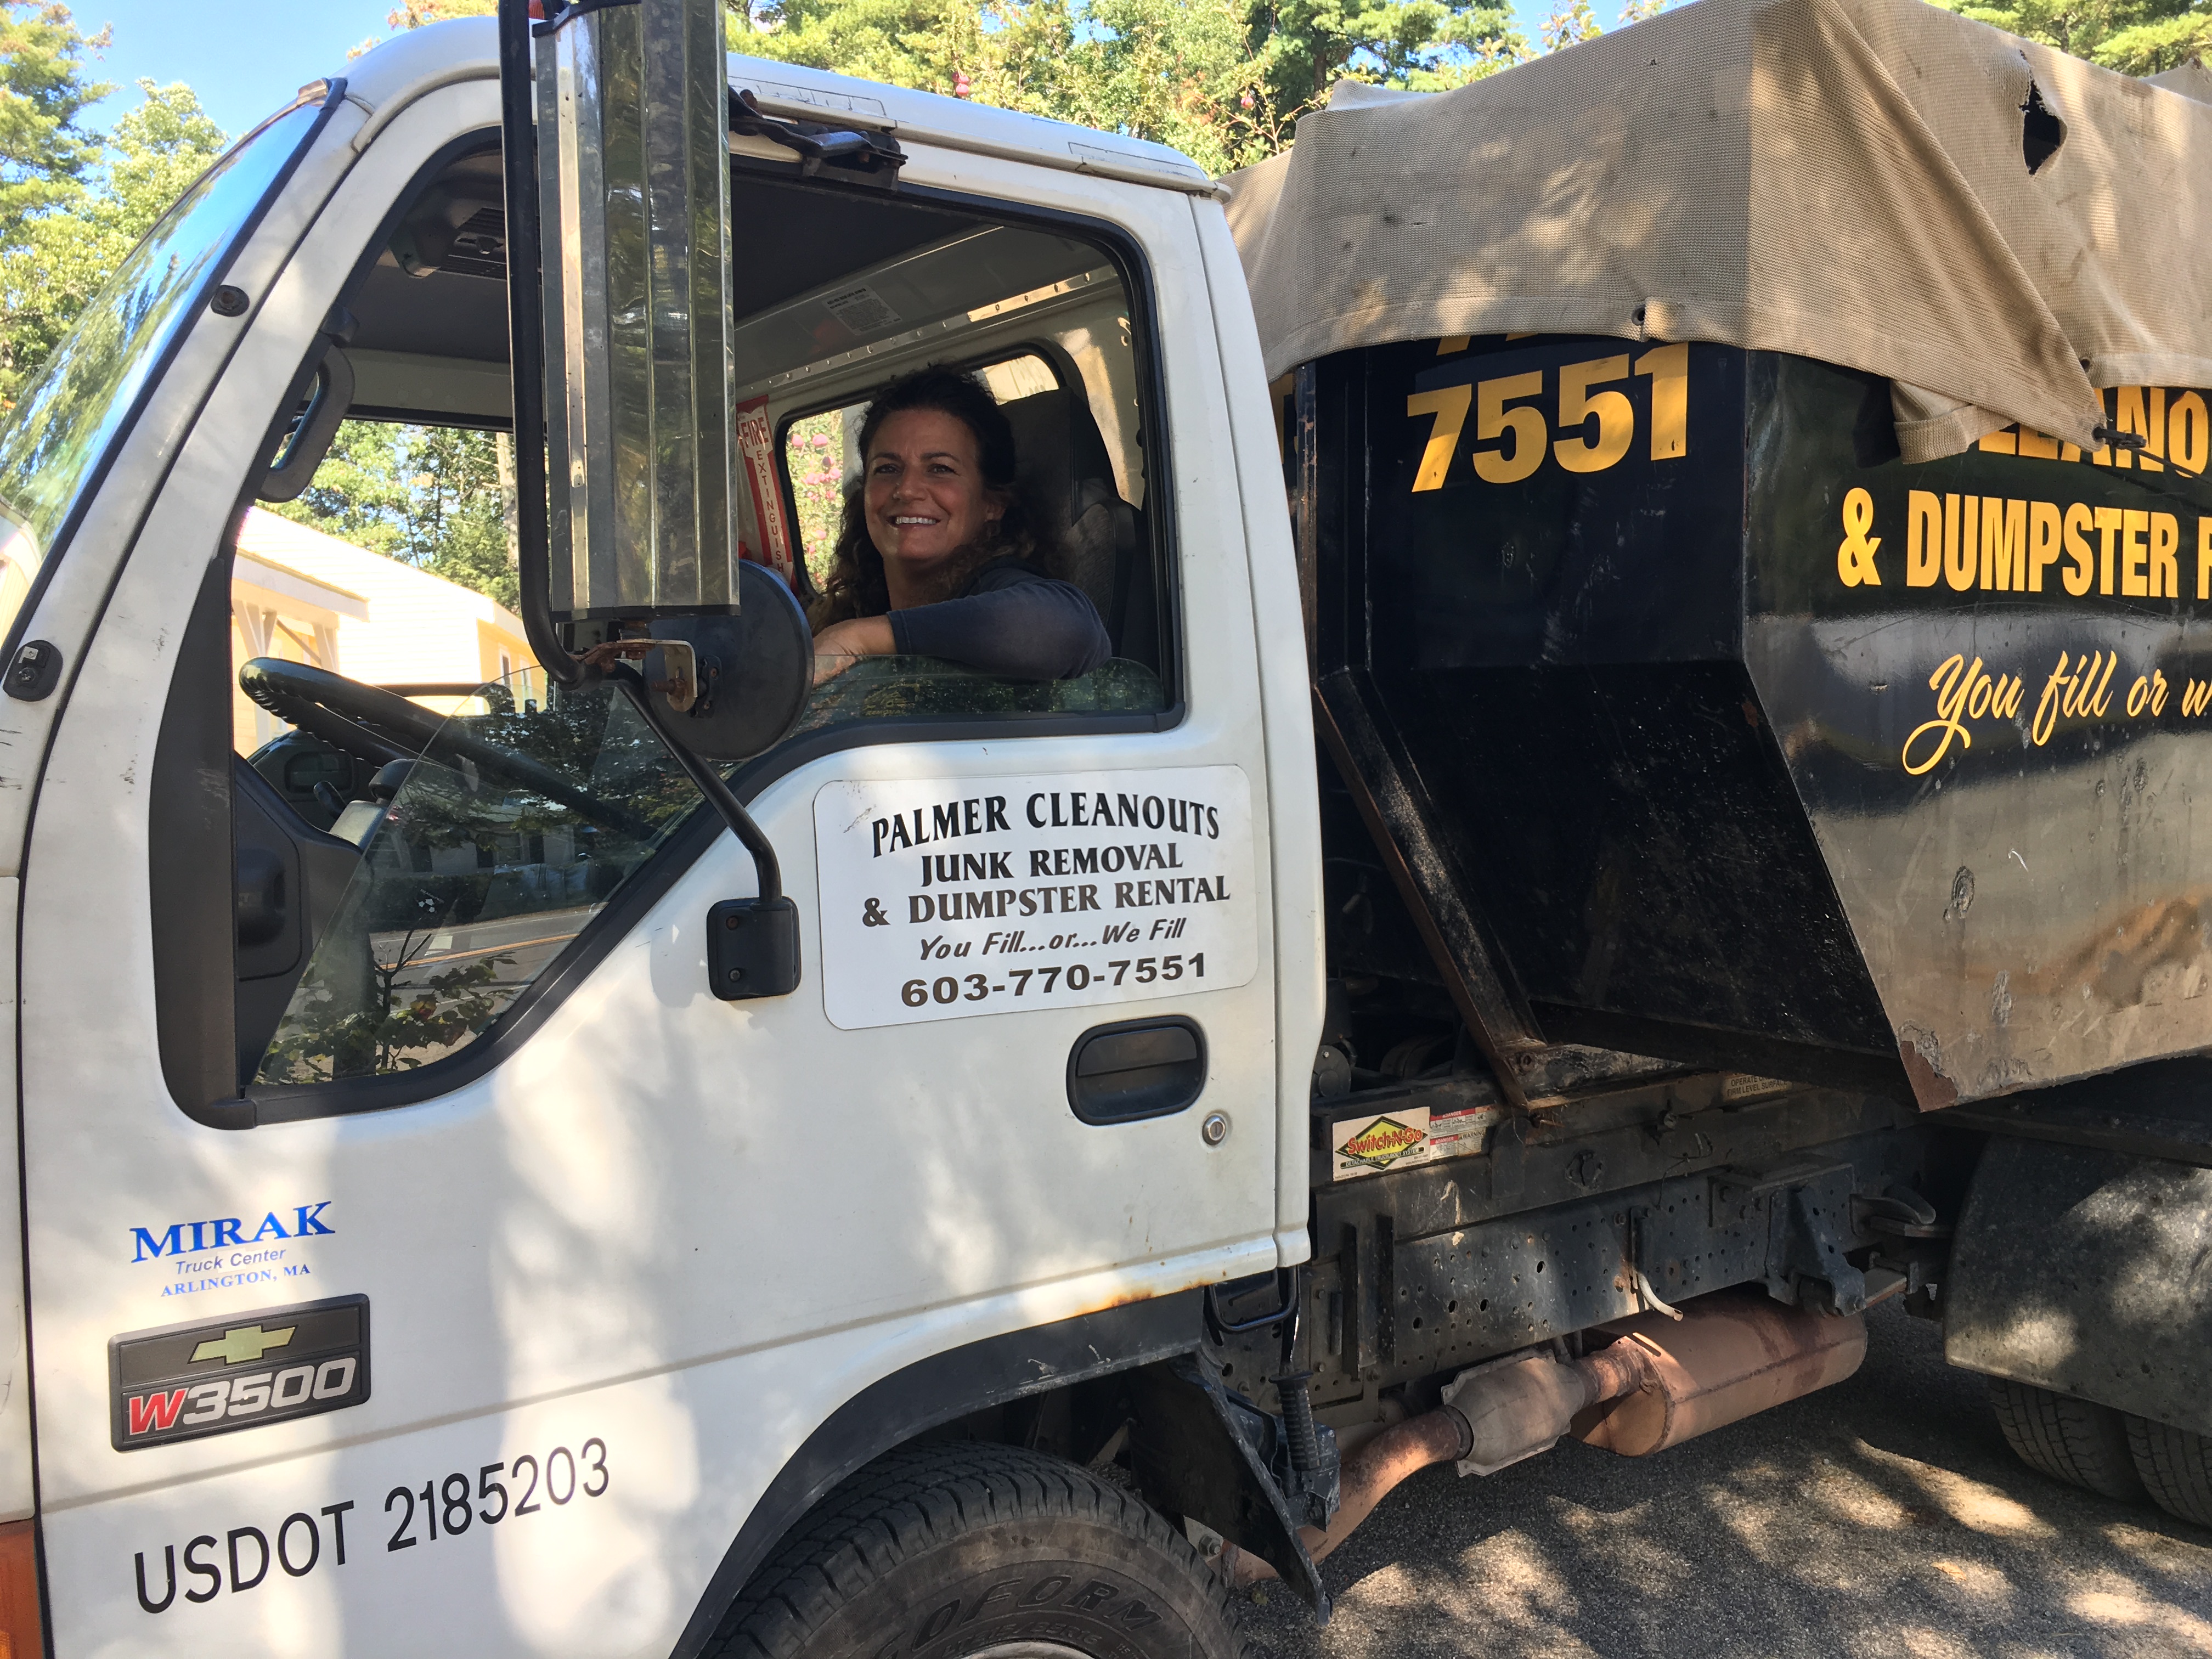 A smiling woman driving the Palmer Cleanouts & Disposal, LLC truck